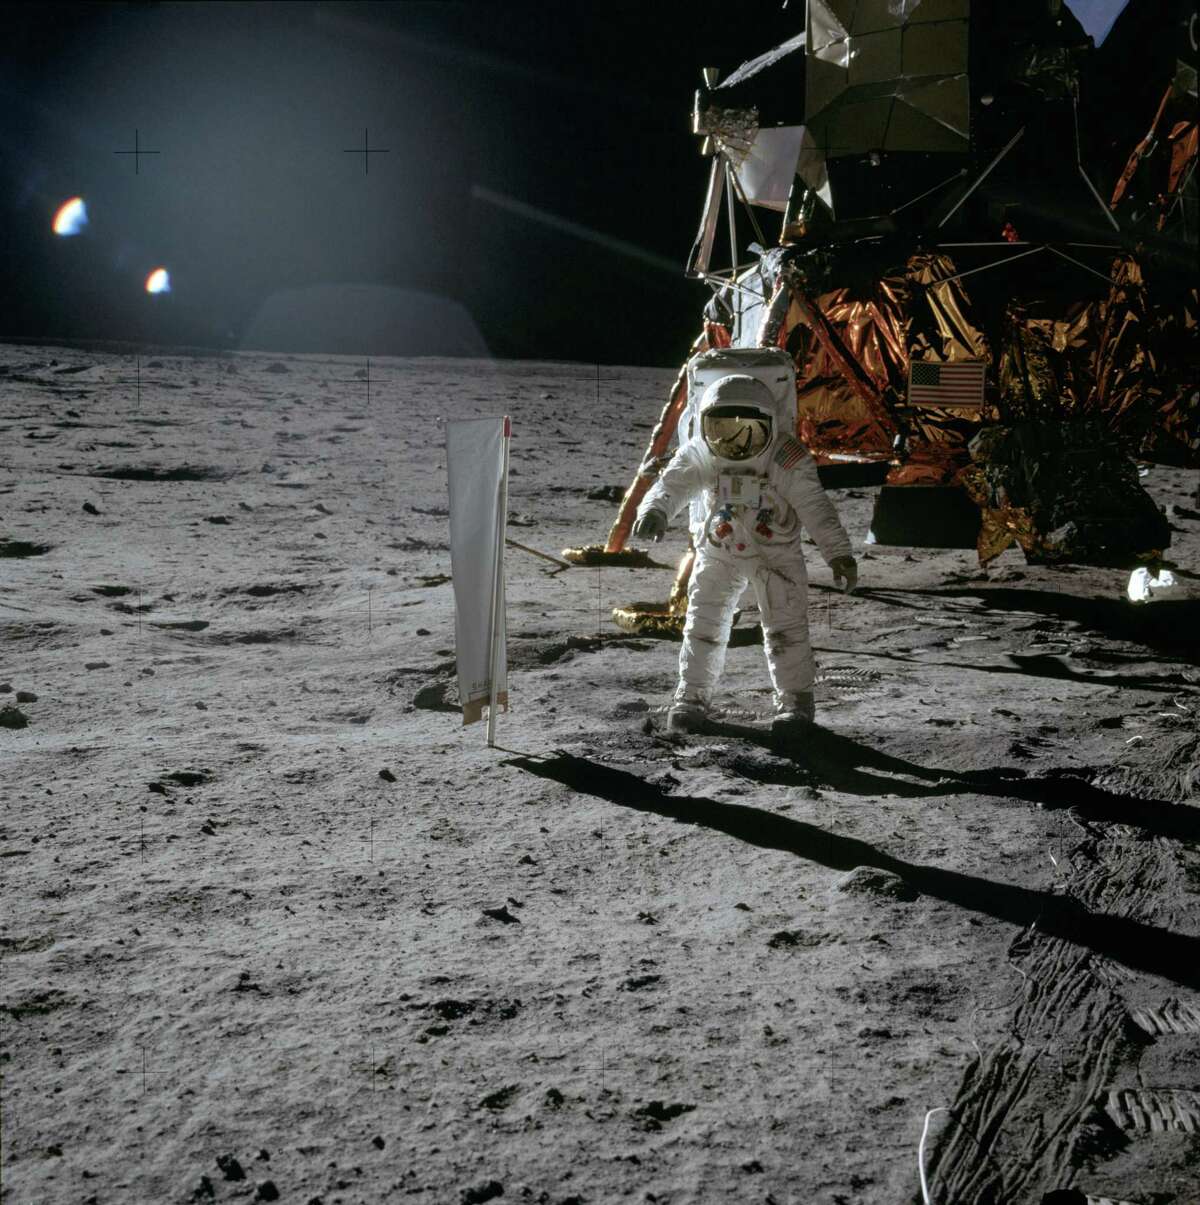 Astronaut Edwin “Buzz” Aldrin, Lunar Module pilot, stands beside the Solar-Wind Composition Experiment, facing the camera in this photo from 1969. The LM is visible behind Aldrin. Linear trails (lines) in the right foreground were formed by the cable of the surface television camera.